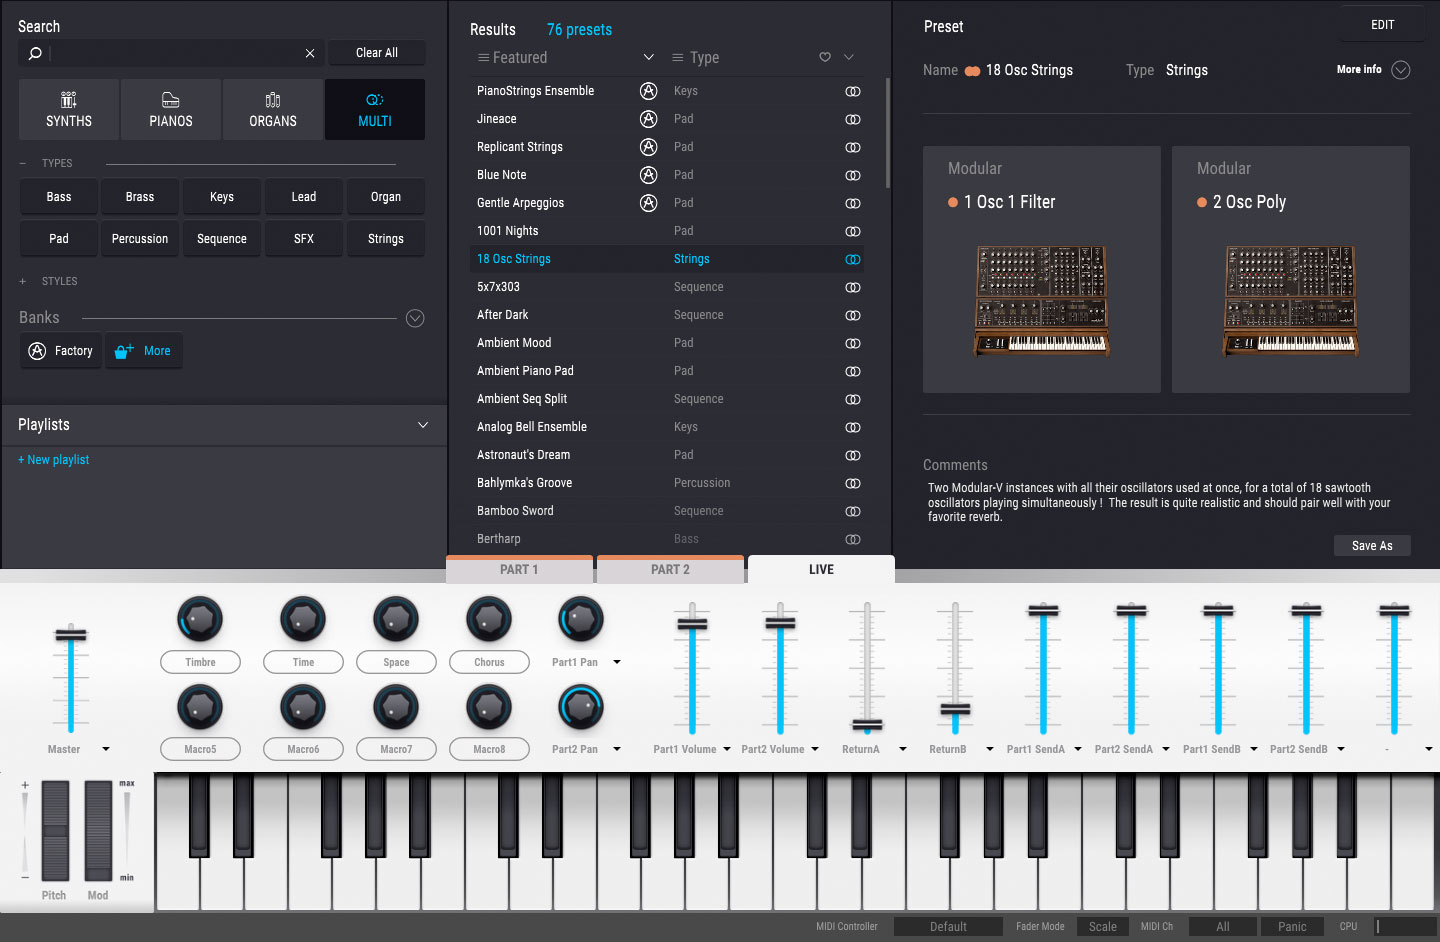 Arturia Analog Lab 5.7.3 download the new version for apple